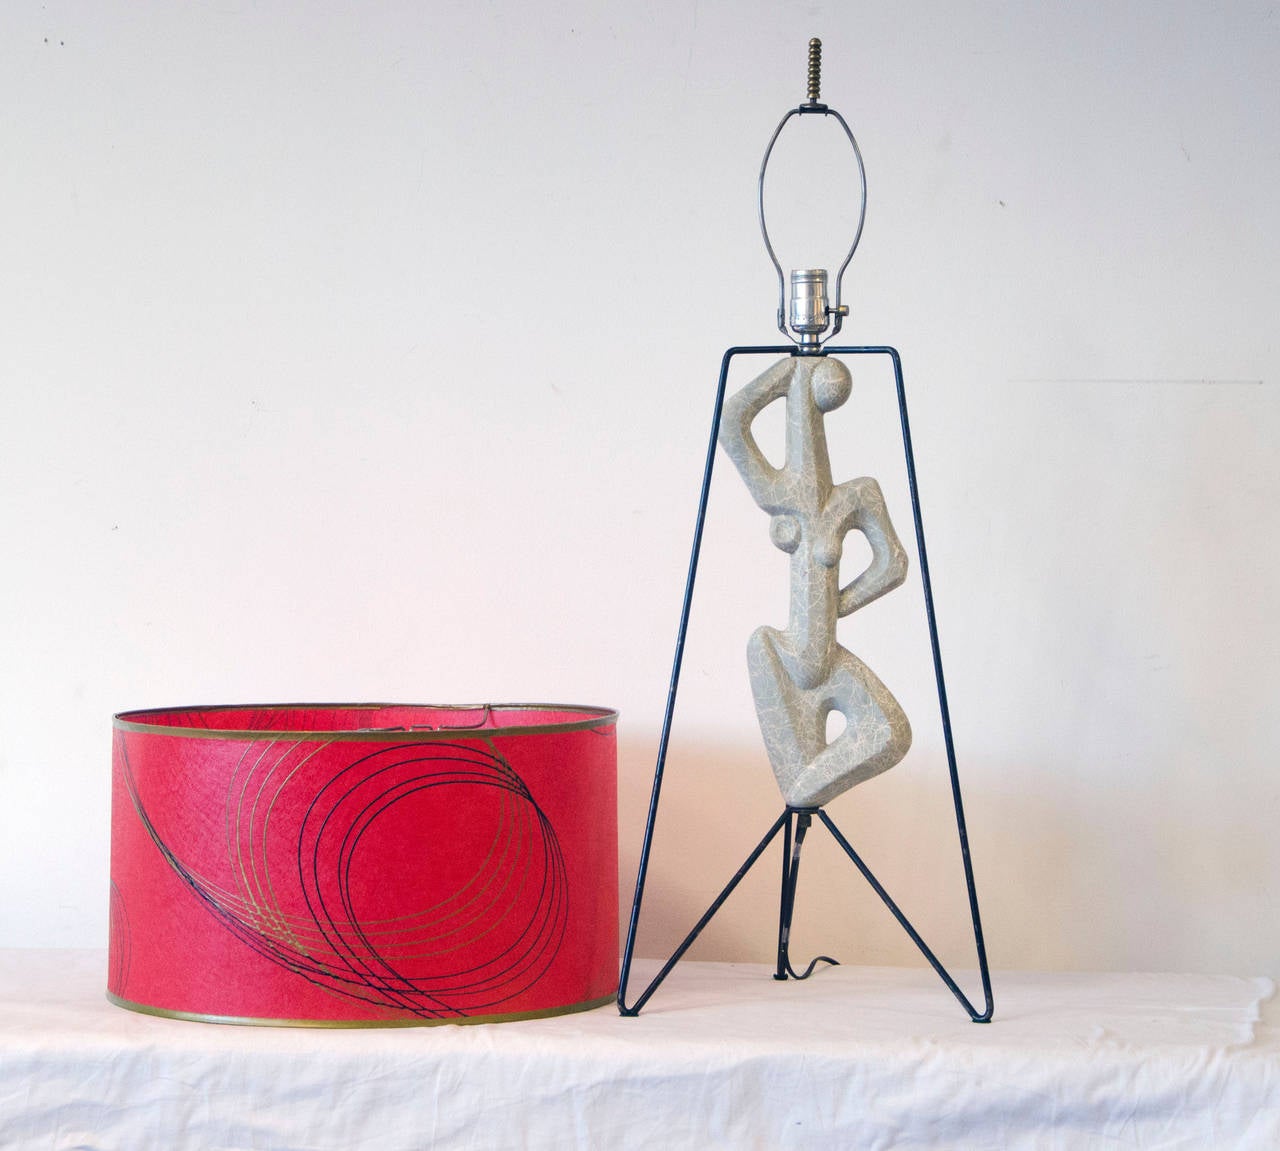 Painted Stylized Table Lamp by Frederick Weinberg